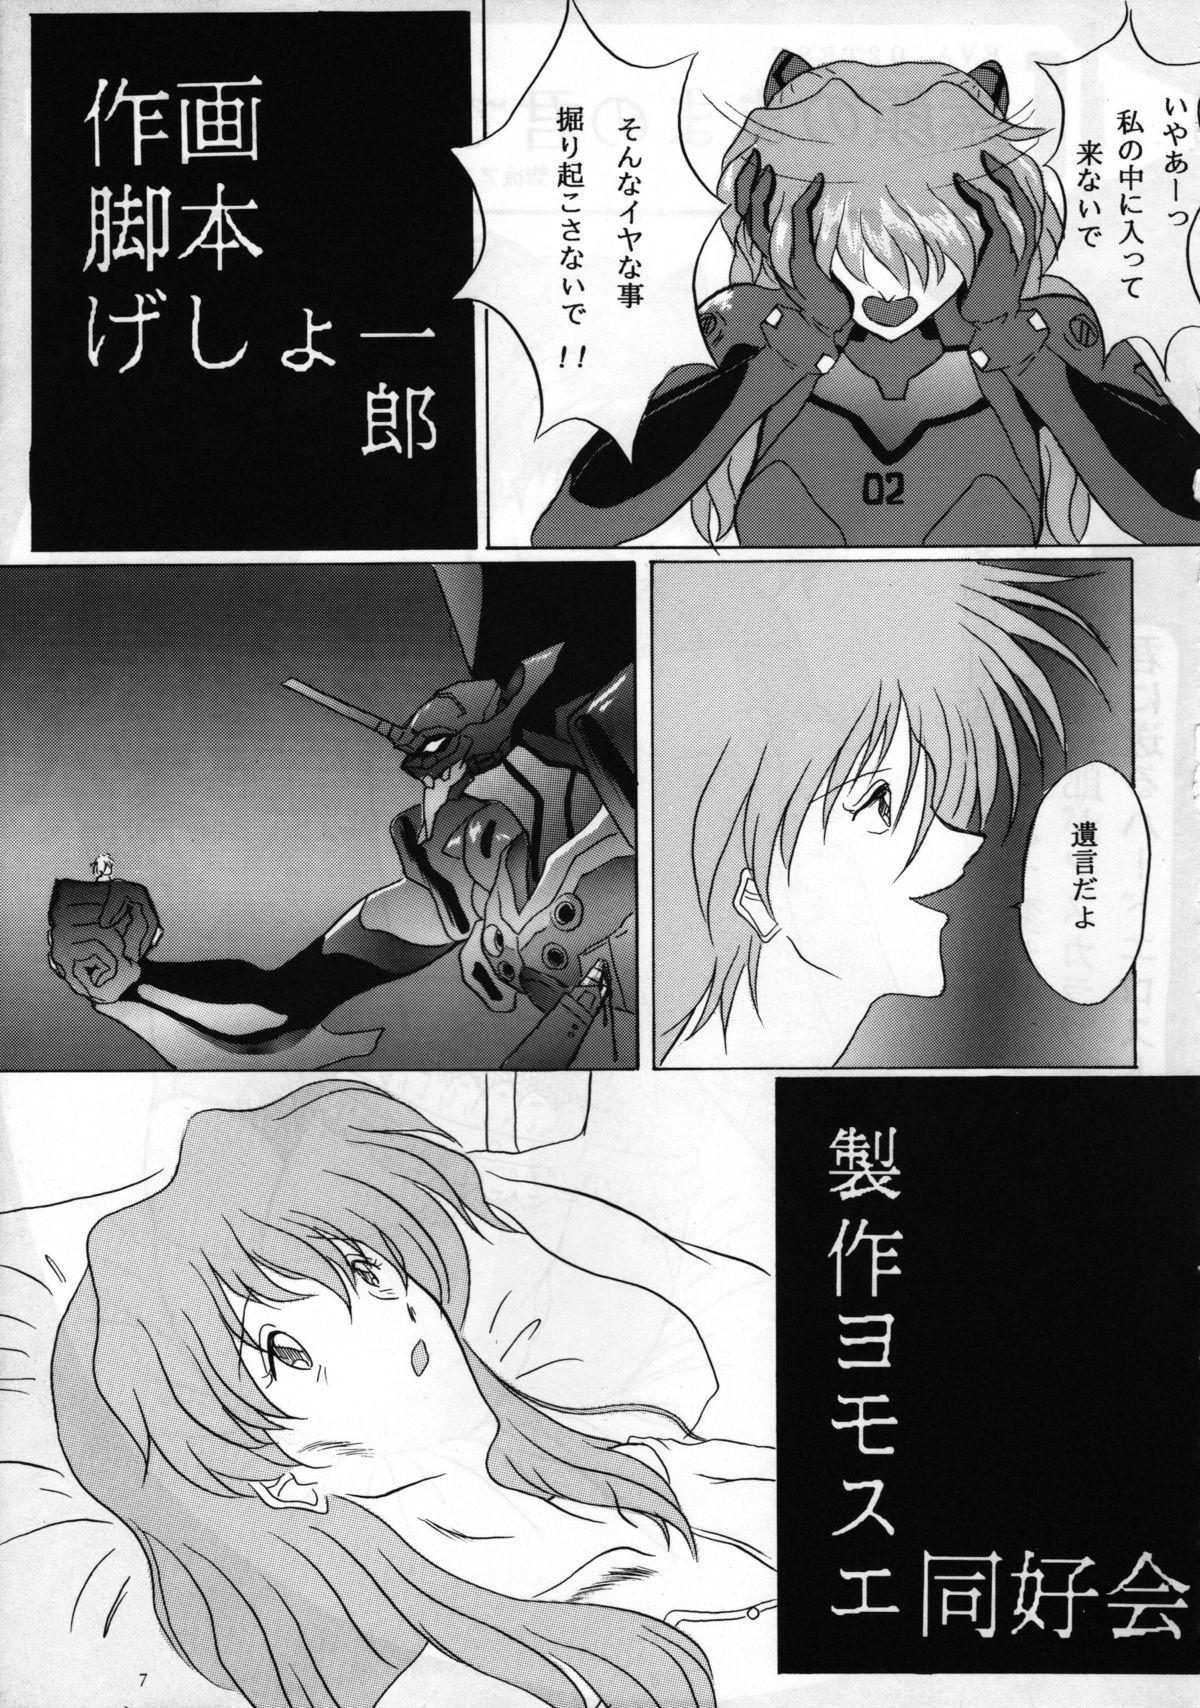 Adult Toys THE OMNIVOUS XI - Neon genesis evangelion Reverse Cowgirl - Page 6